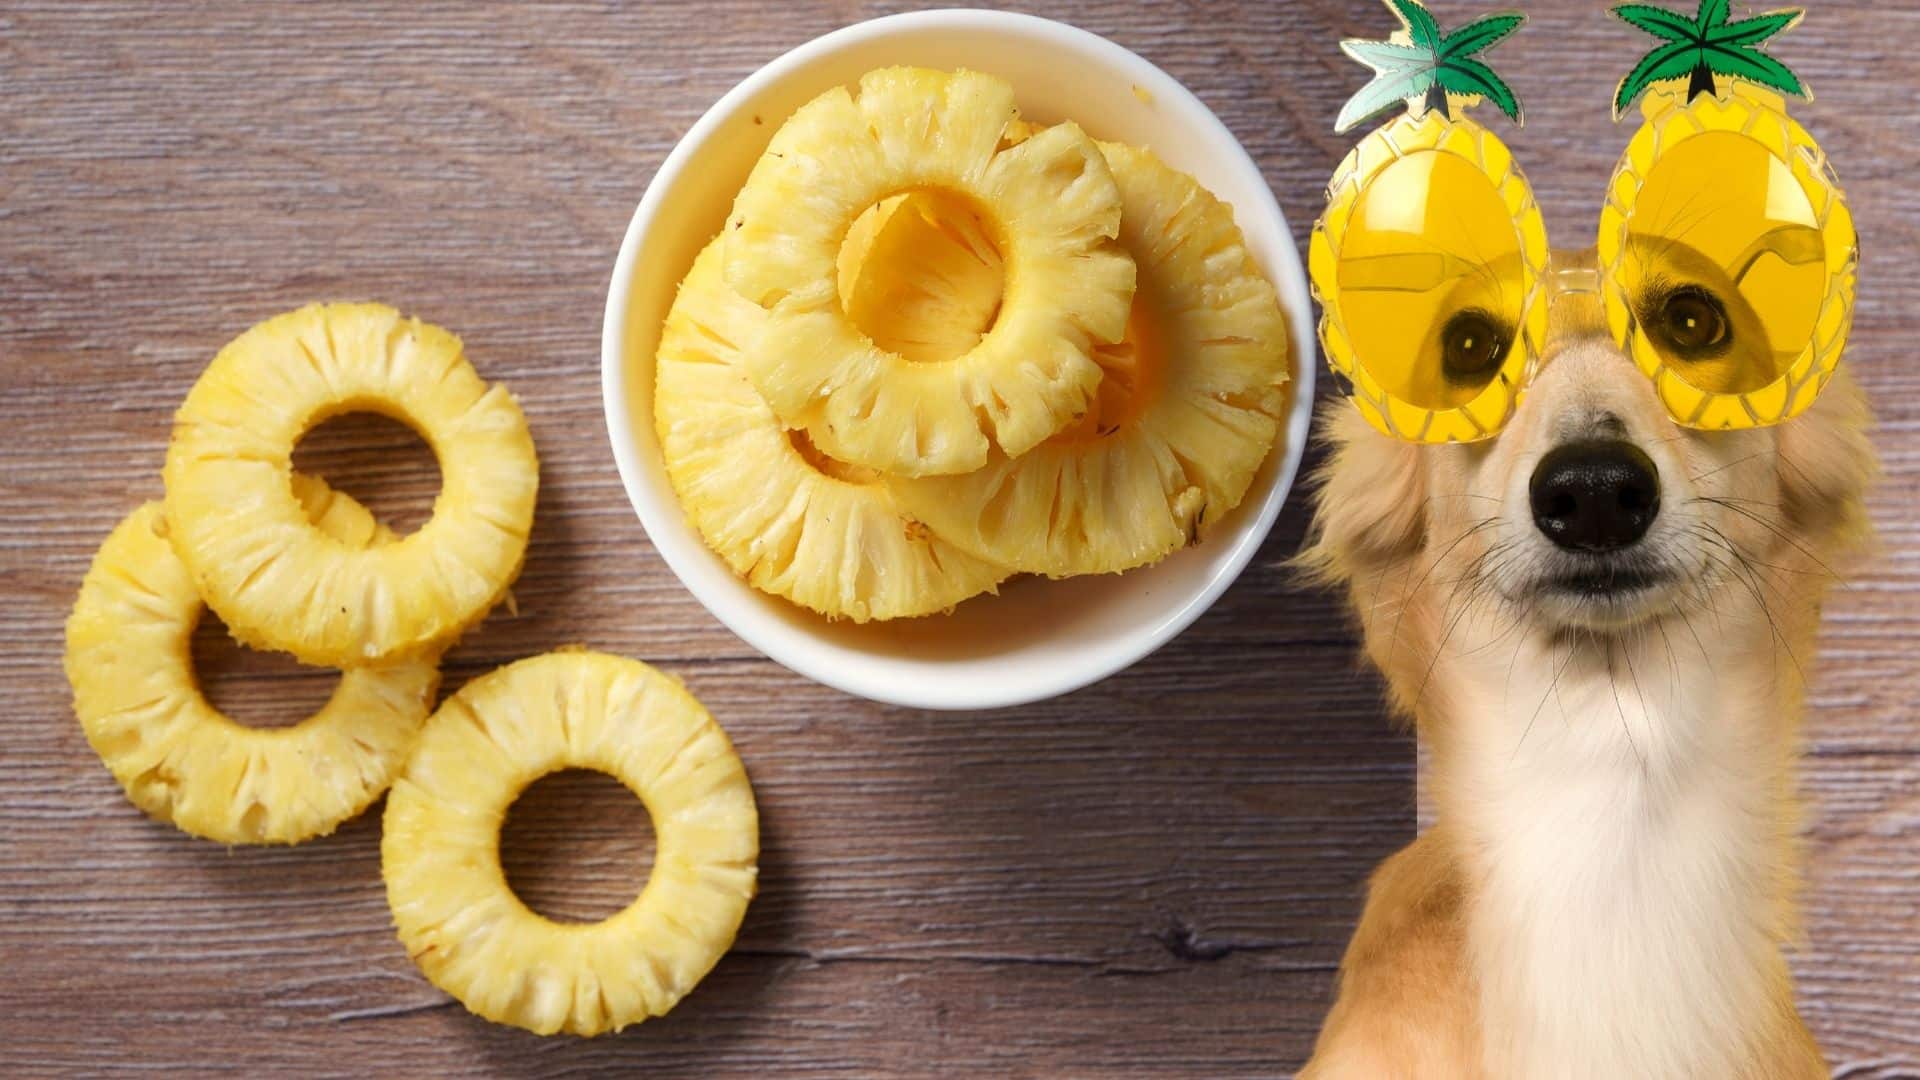 Can Dogs Eat Pineapple? Our Amazing Vet Weighs In